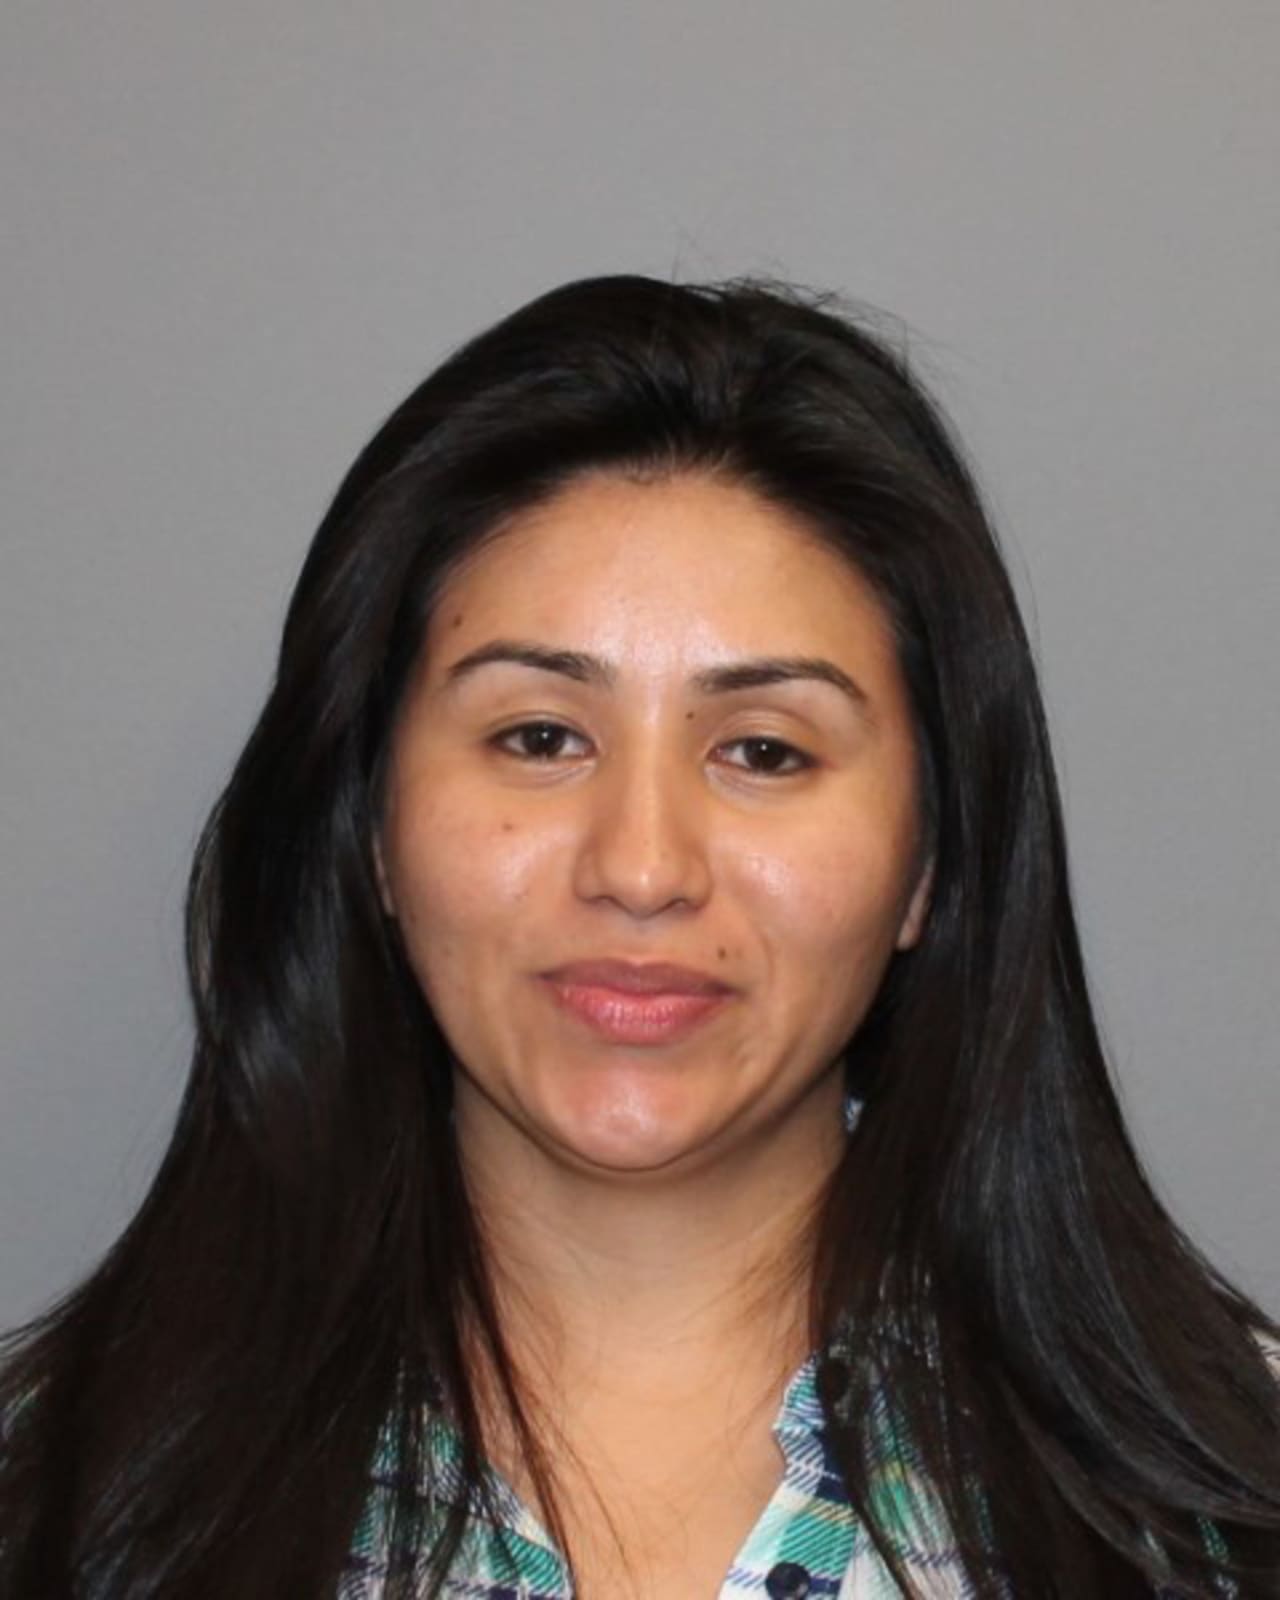 Police charged Olga Gutierrez with drunken driving, police said.